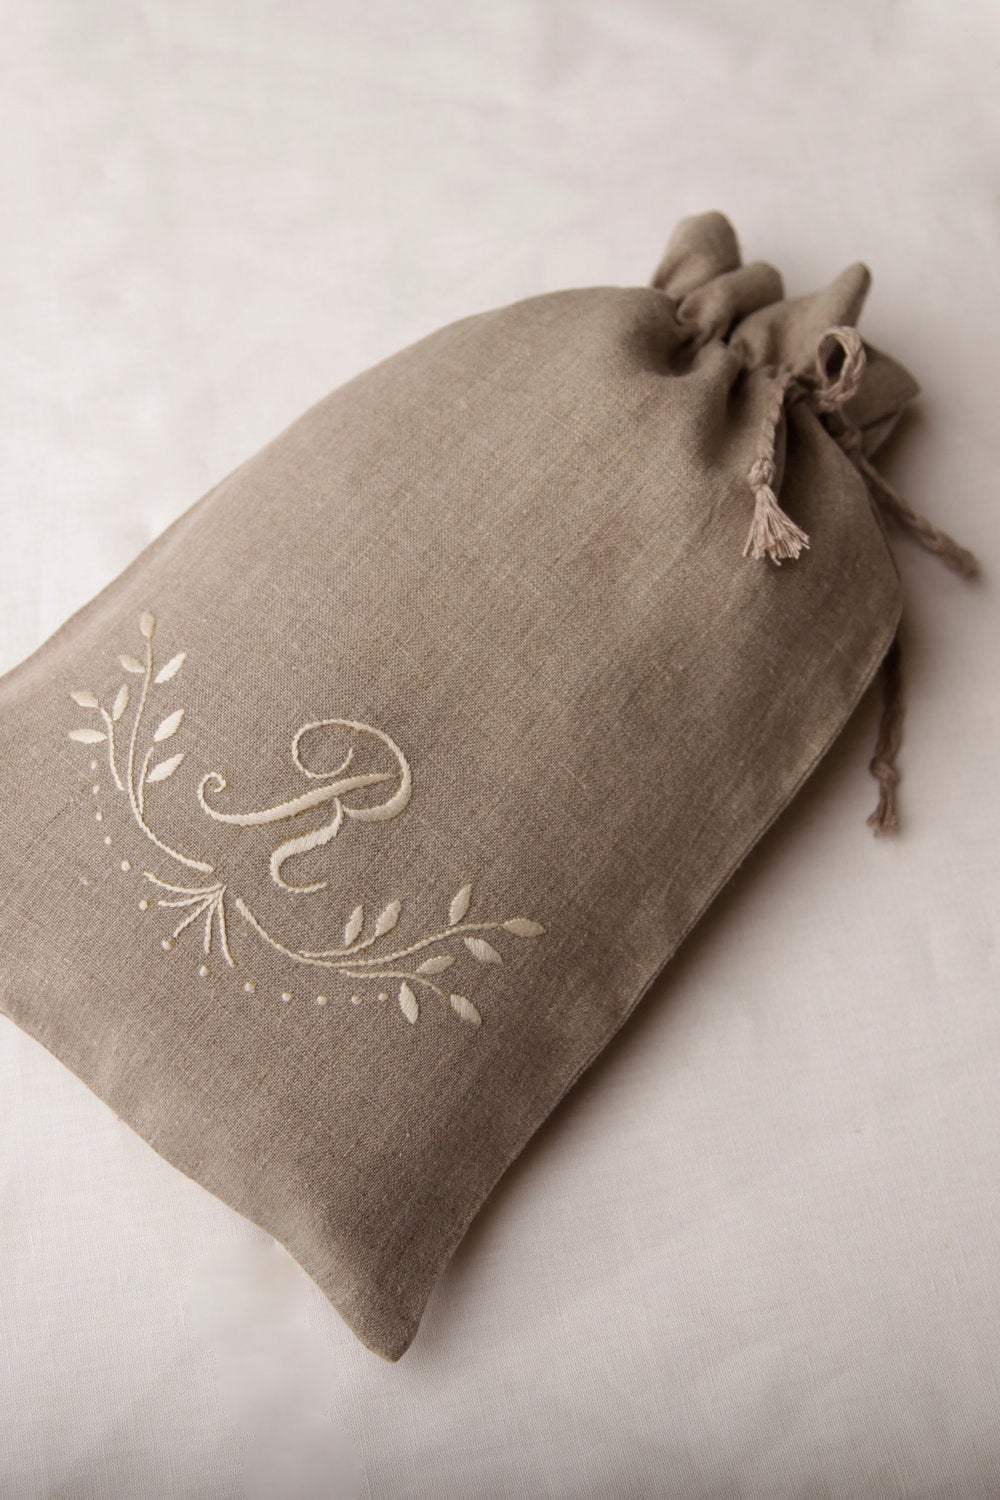 Linen Bag Monogrammed/ Linen Gift Bag Embroidered/ Flax Pack/ Shoes Bag Personalized/ Gift Wrap Linen